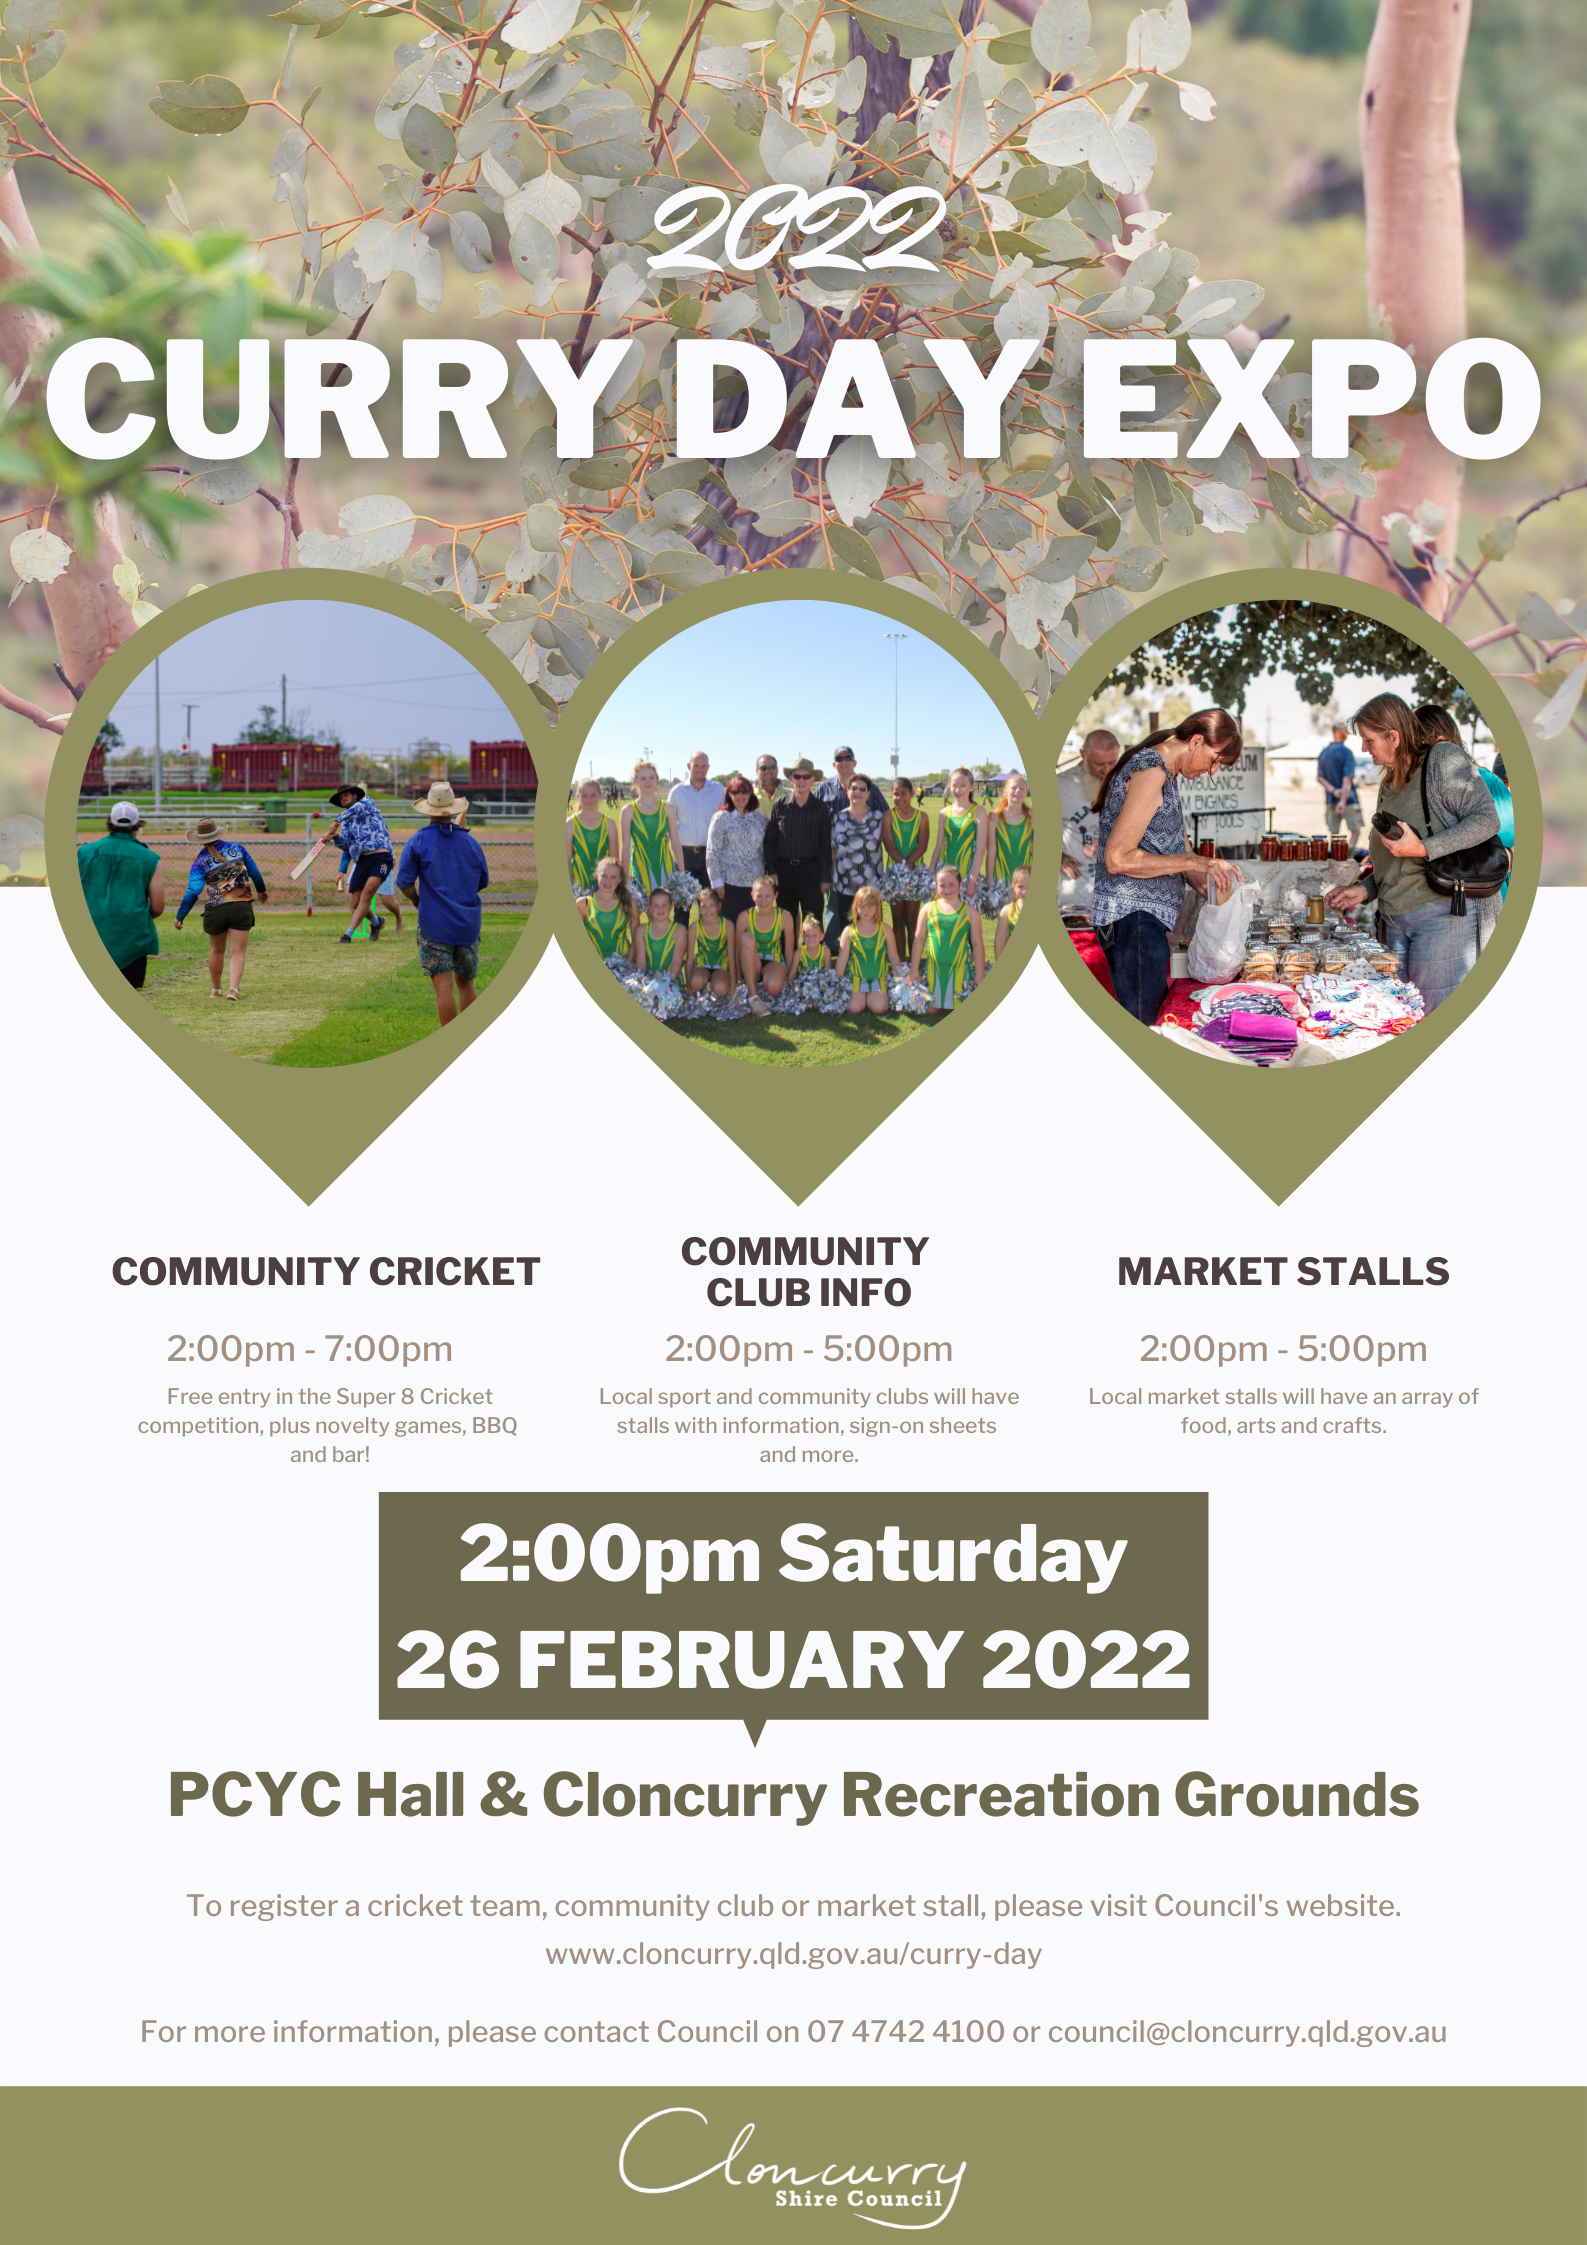 Curry day expo 2022